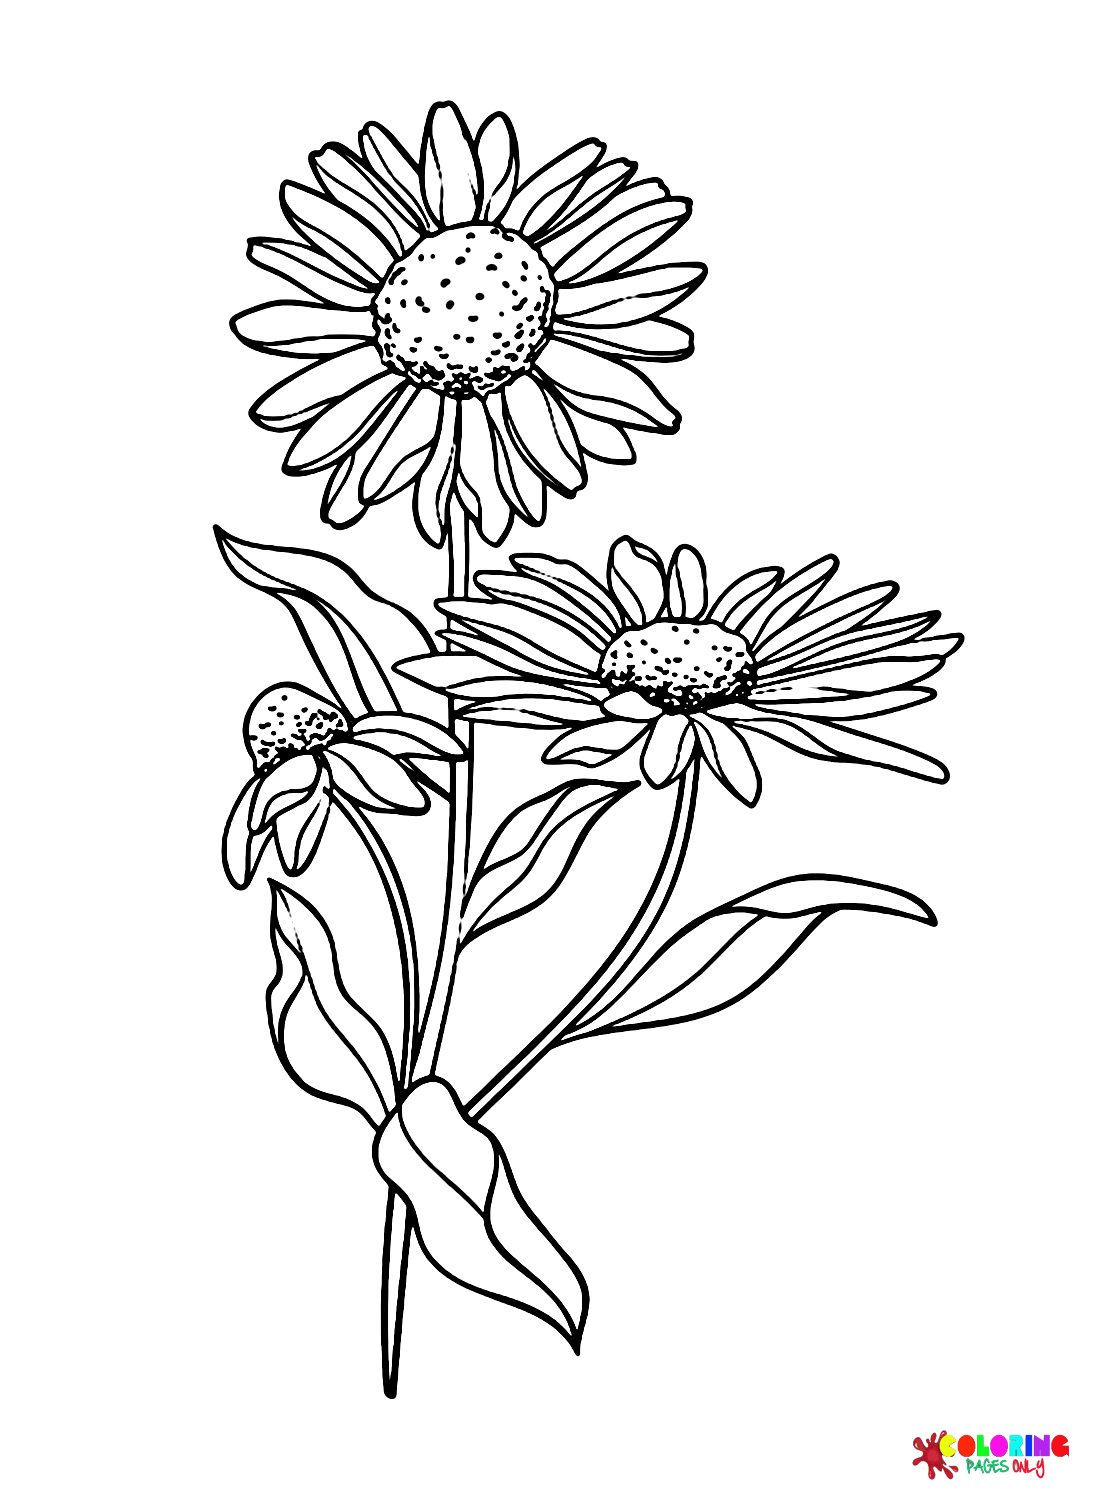 Daisy coloring pages printable for free download